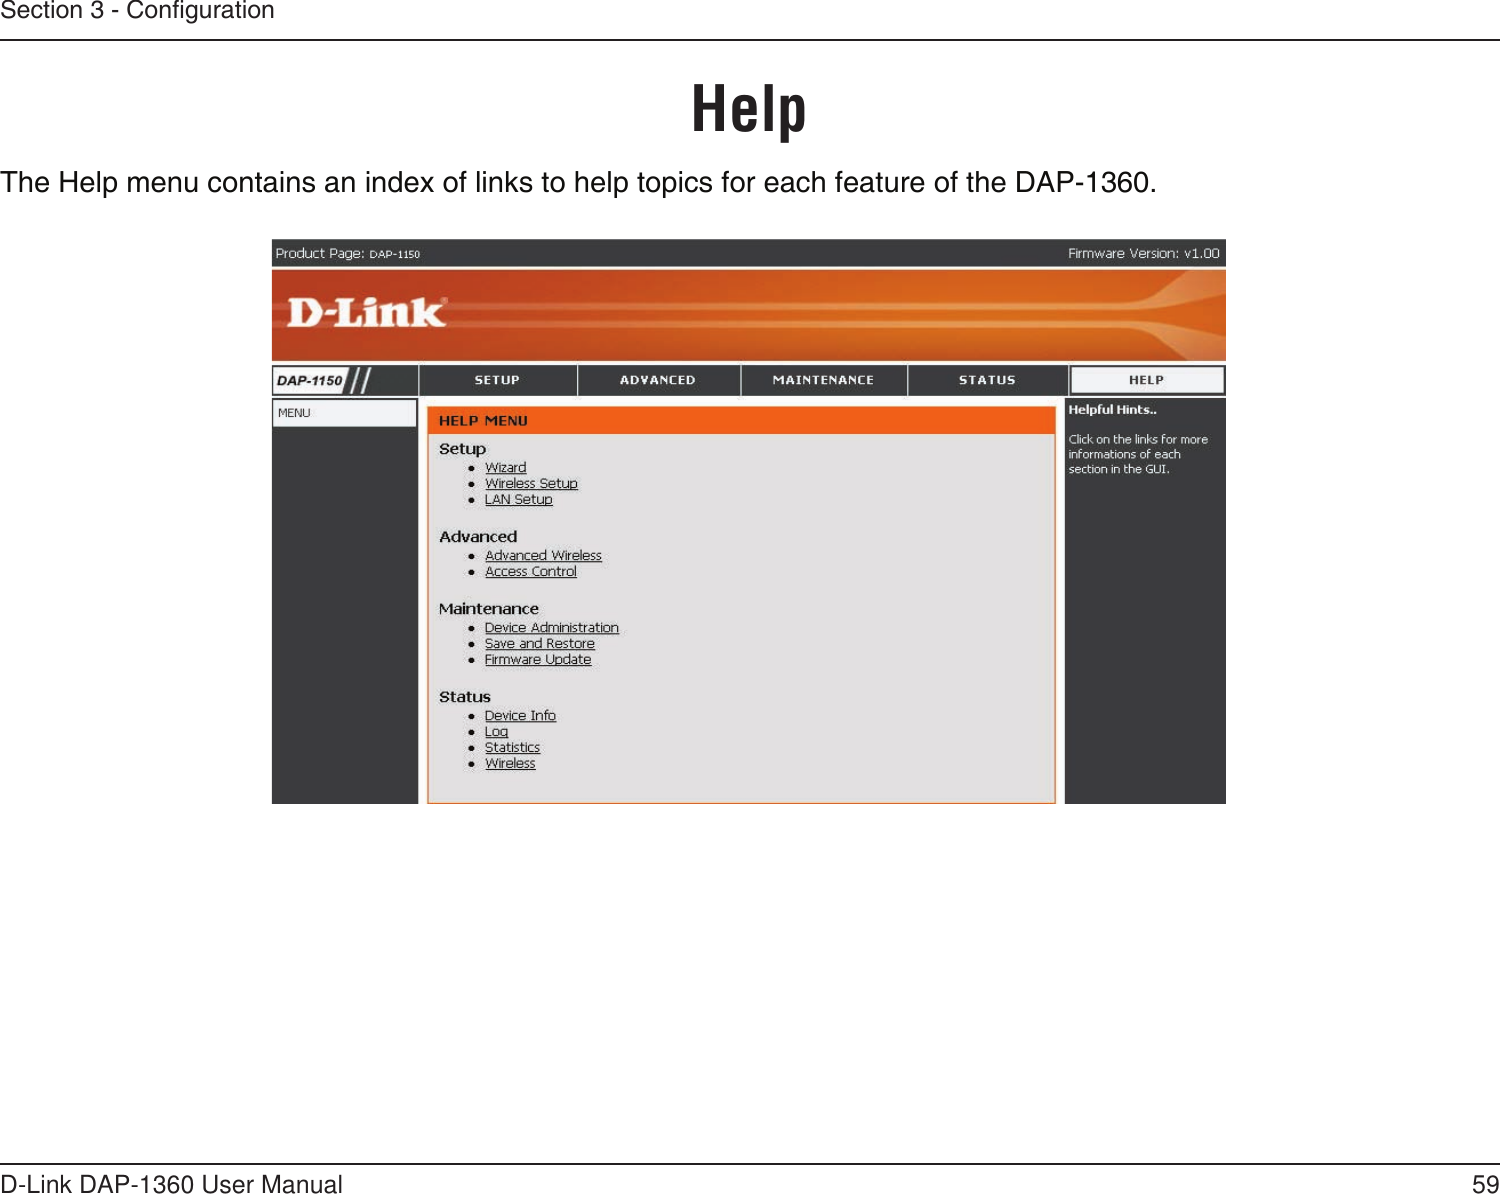 59D-Link DAP-1360 User ManualSection 3 - CongurationHelpThe Help menu contains an index of links to help topics for each feature of the DAP-1360.